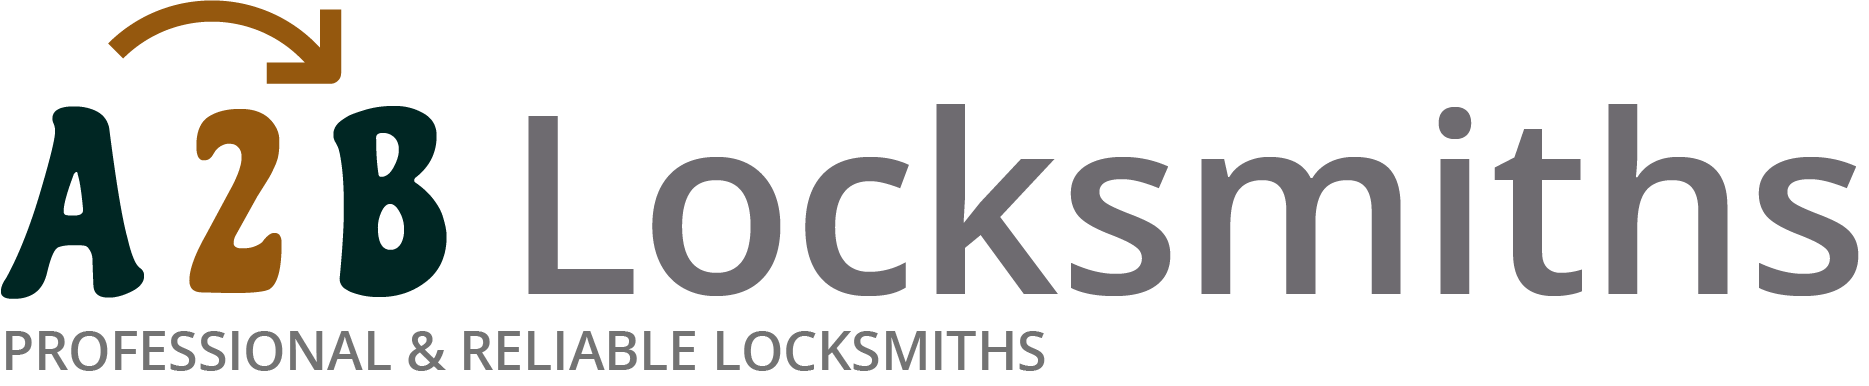 If you are locked out of house in Stowmarket, our 24/7 local emergency locksmith services can help you.